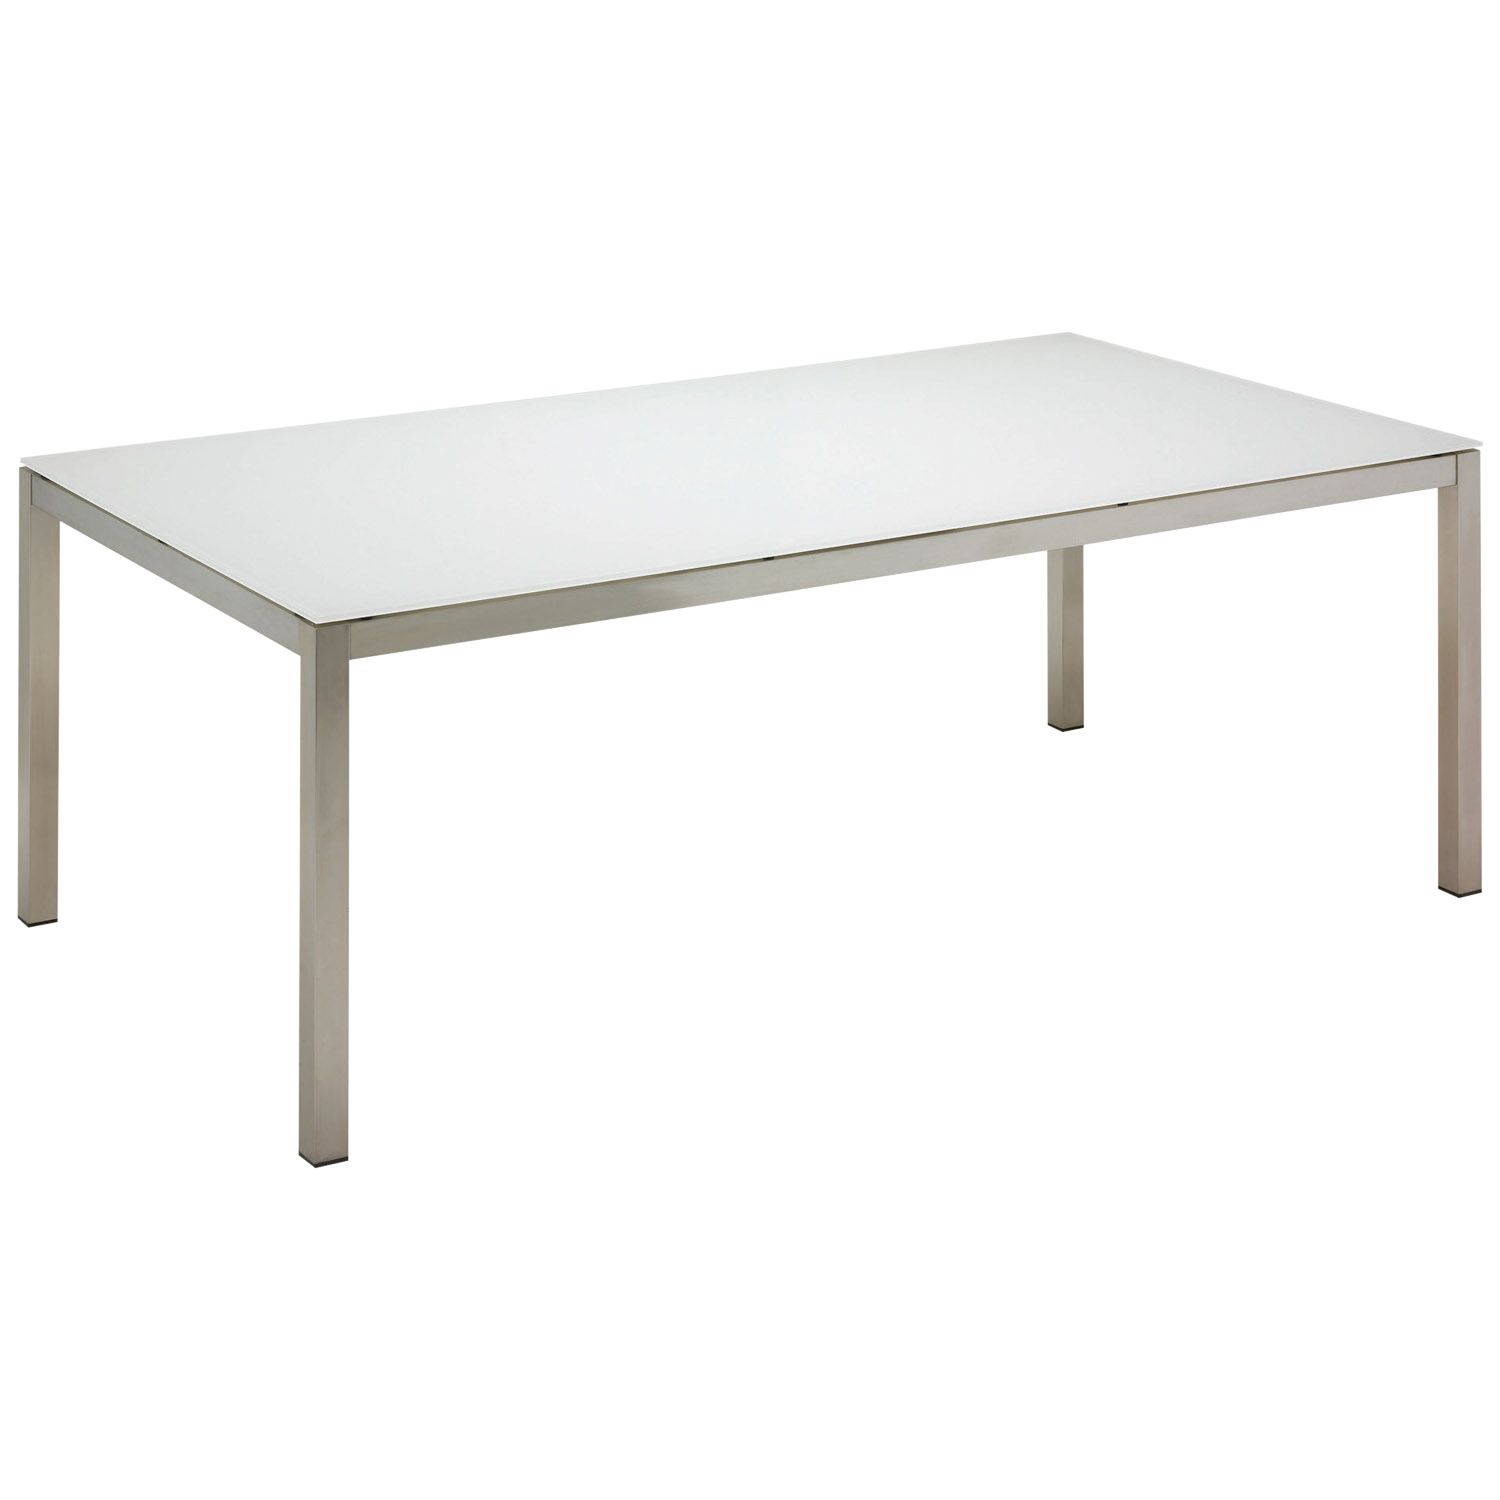 Gloster Kore Rectangular 8 Seater Outdoor Dining Table, White Glass, width 206cm